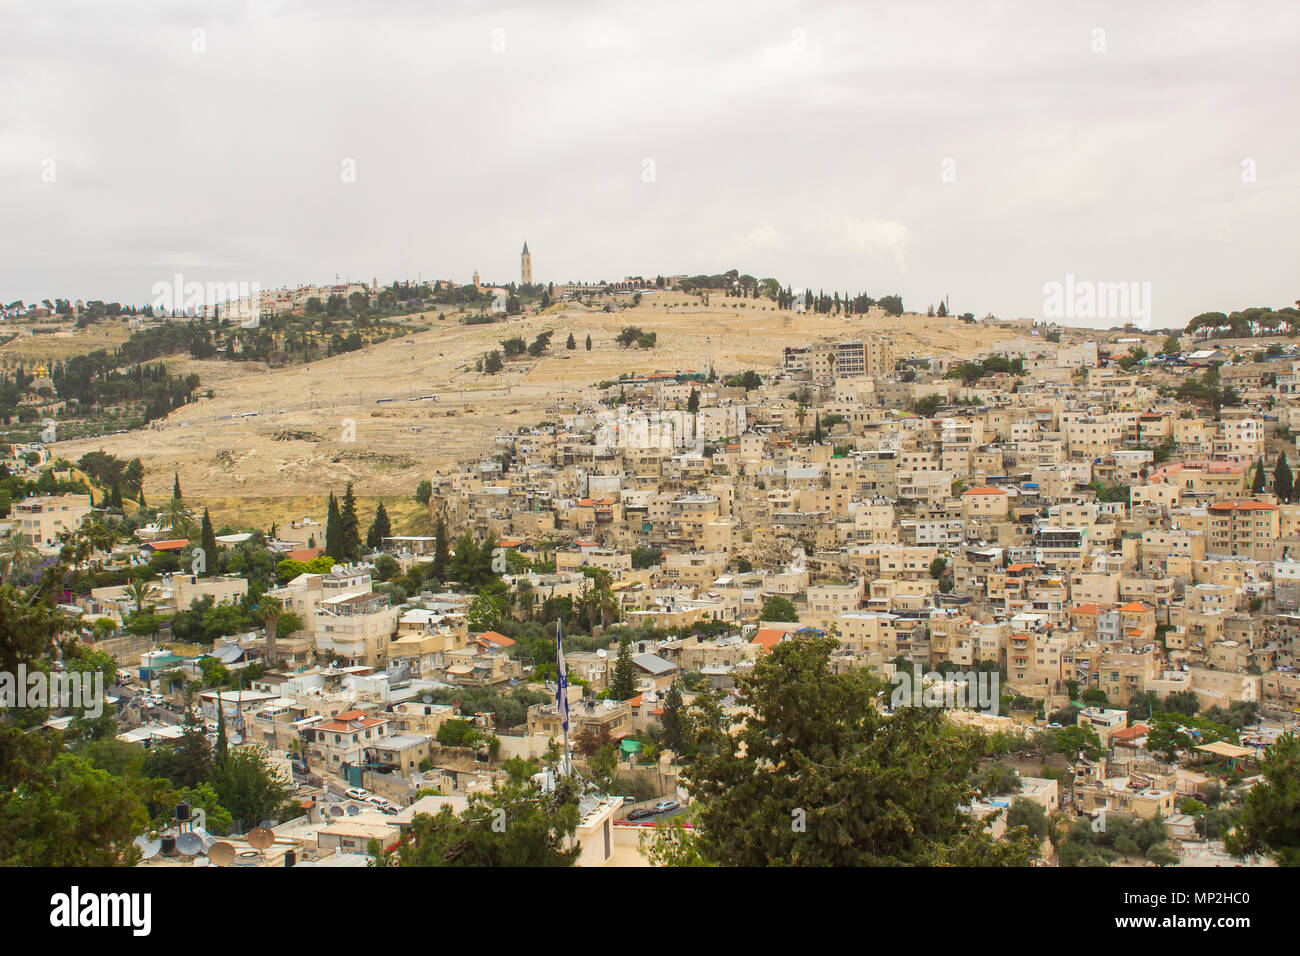 A view of the city of Jerusalem with in dense housing from the rooftop of the ancient Herod's Palace where Jesus Christ was ill treated. Stock Photo